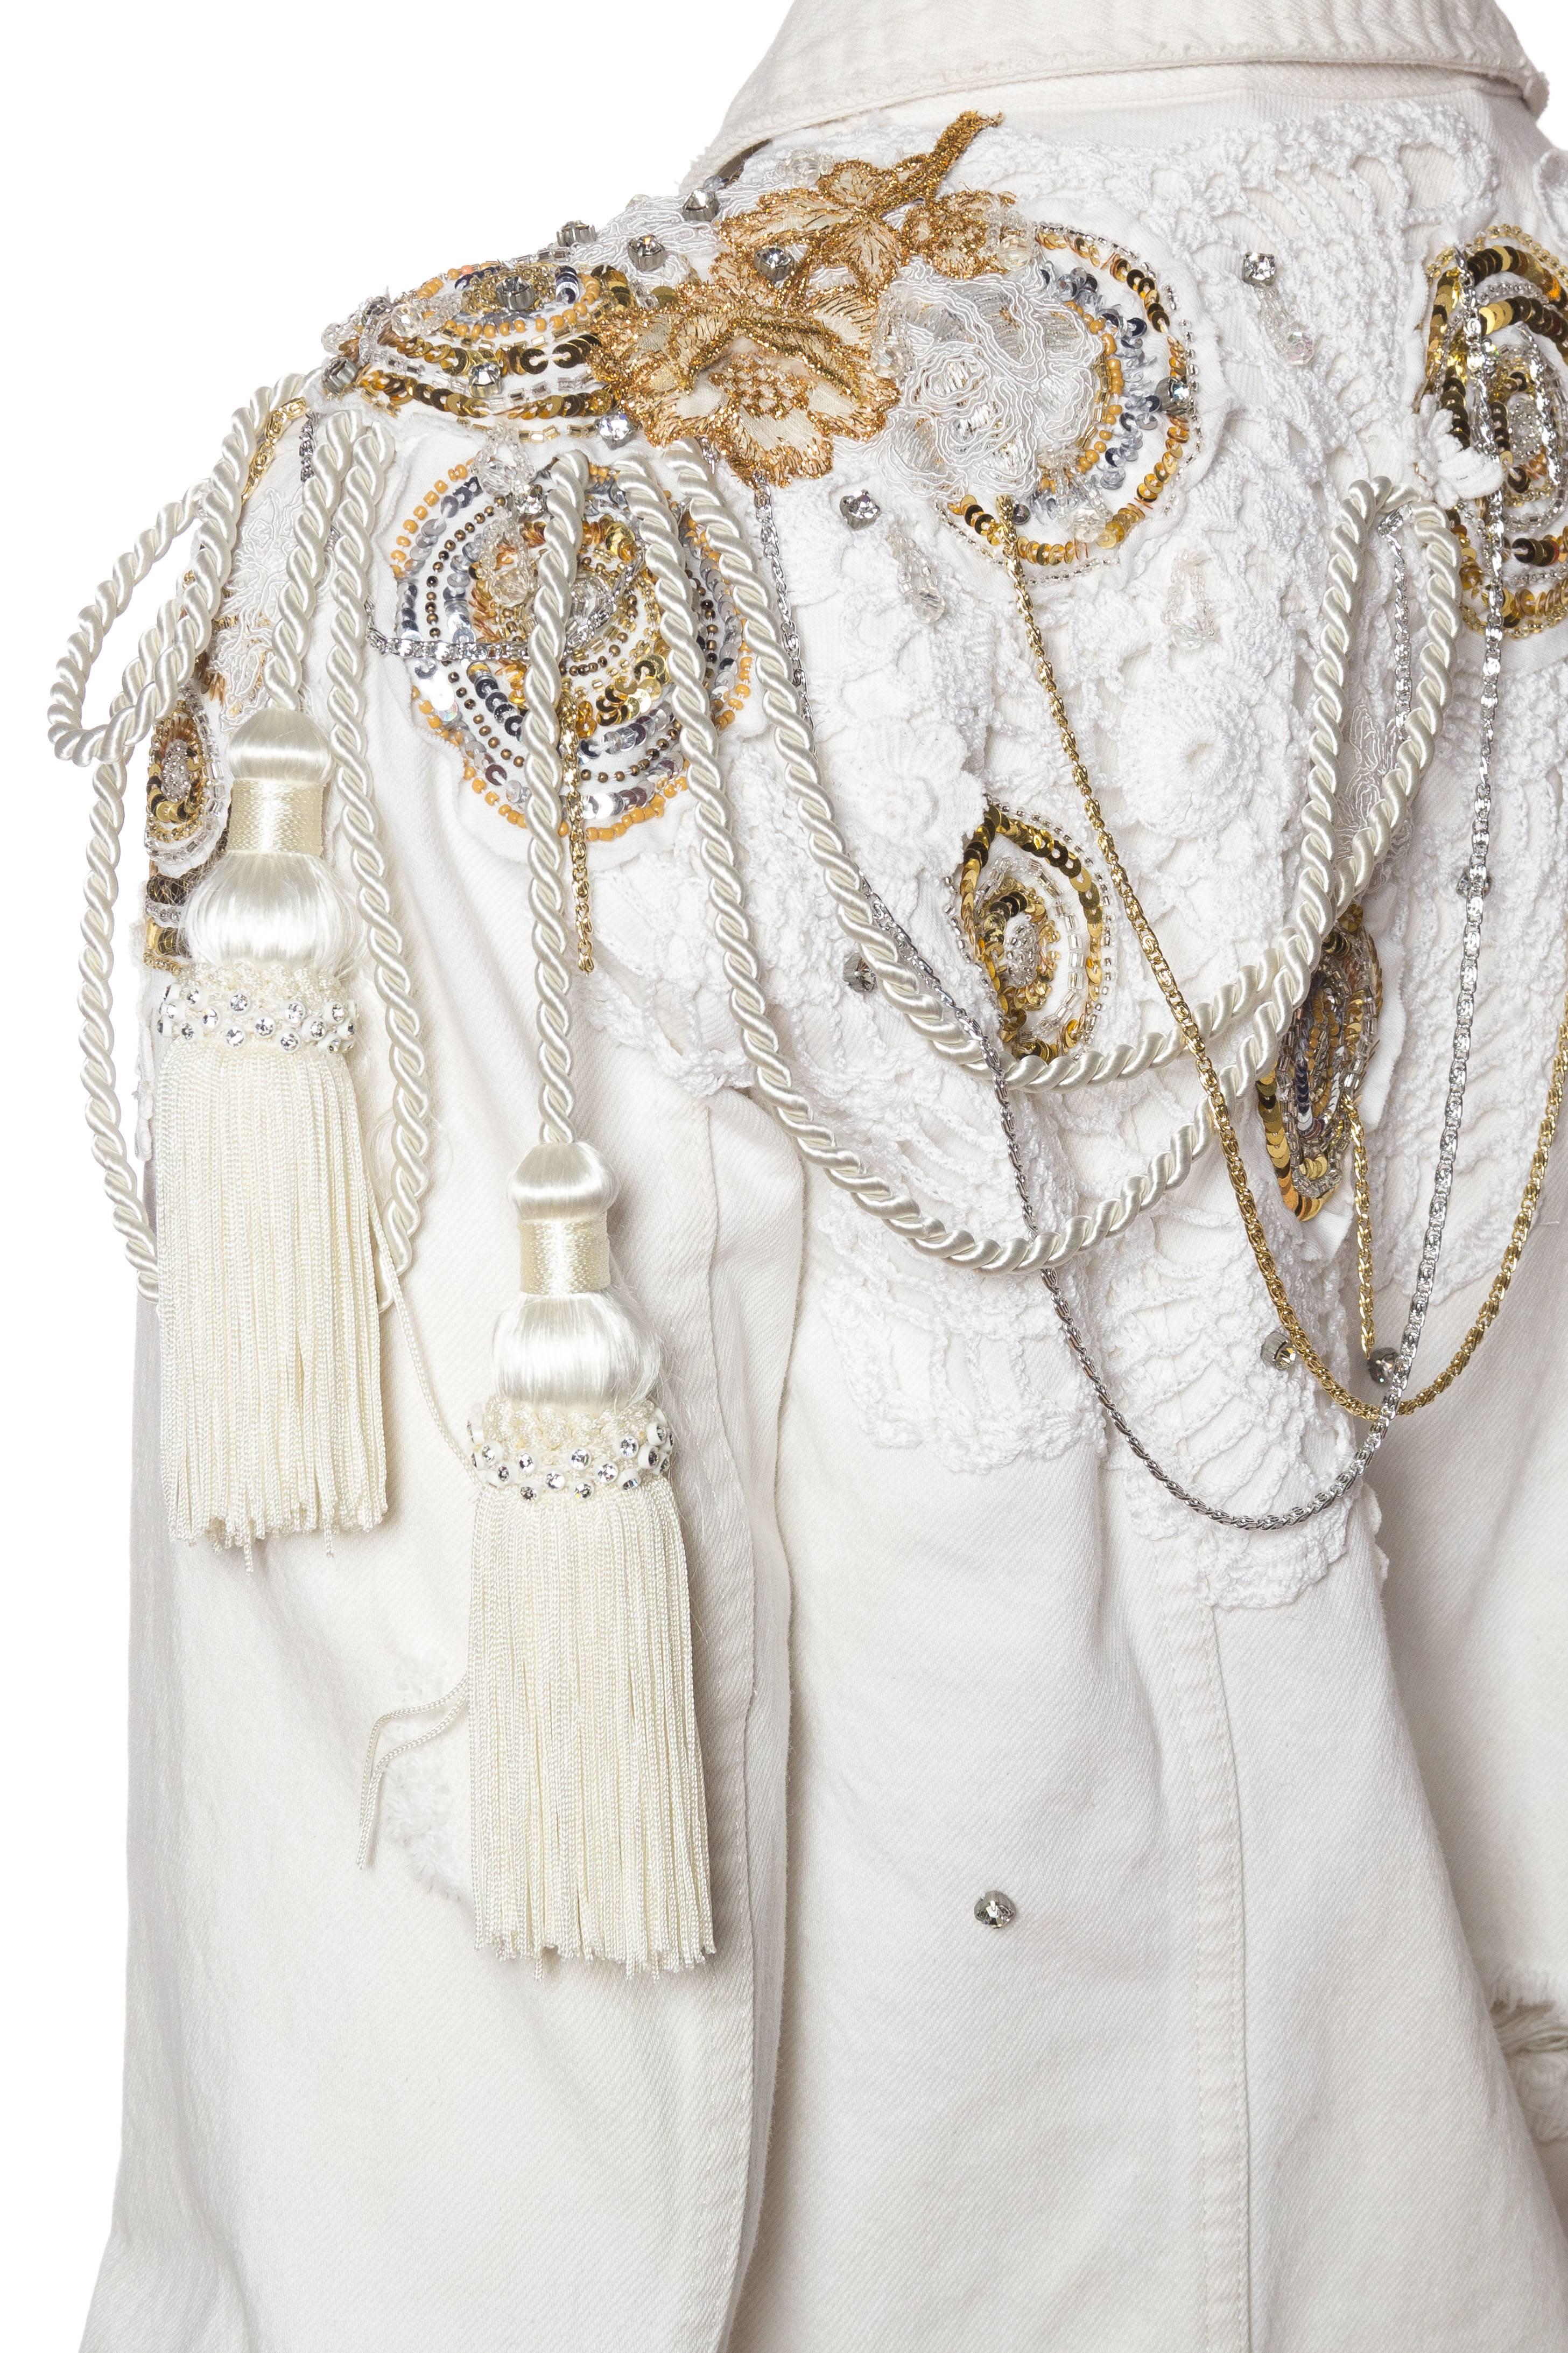 MORPHEW COLLECTION X UNLEASHED White Cotton Denim Gold Sequin, Lace & Crystal E 2